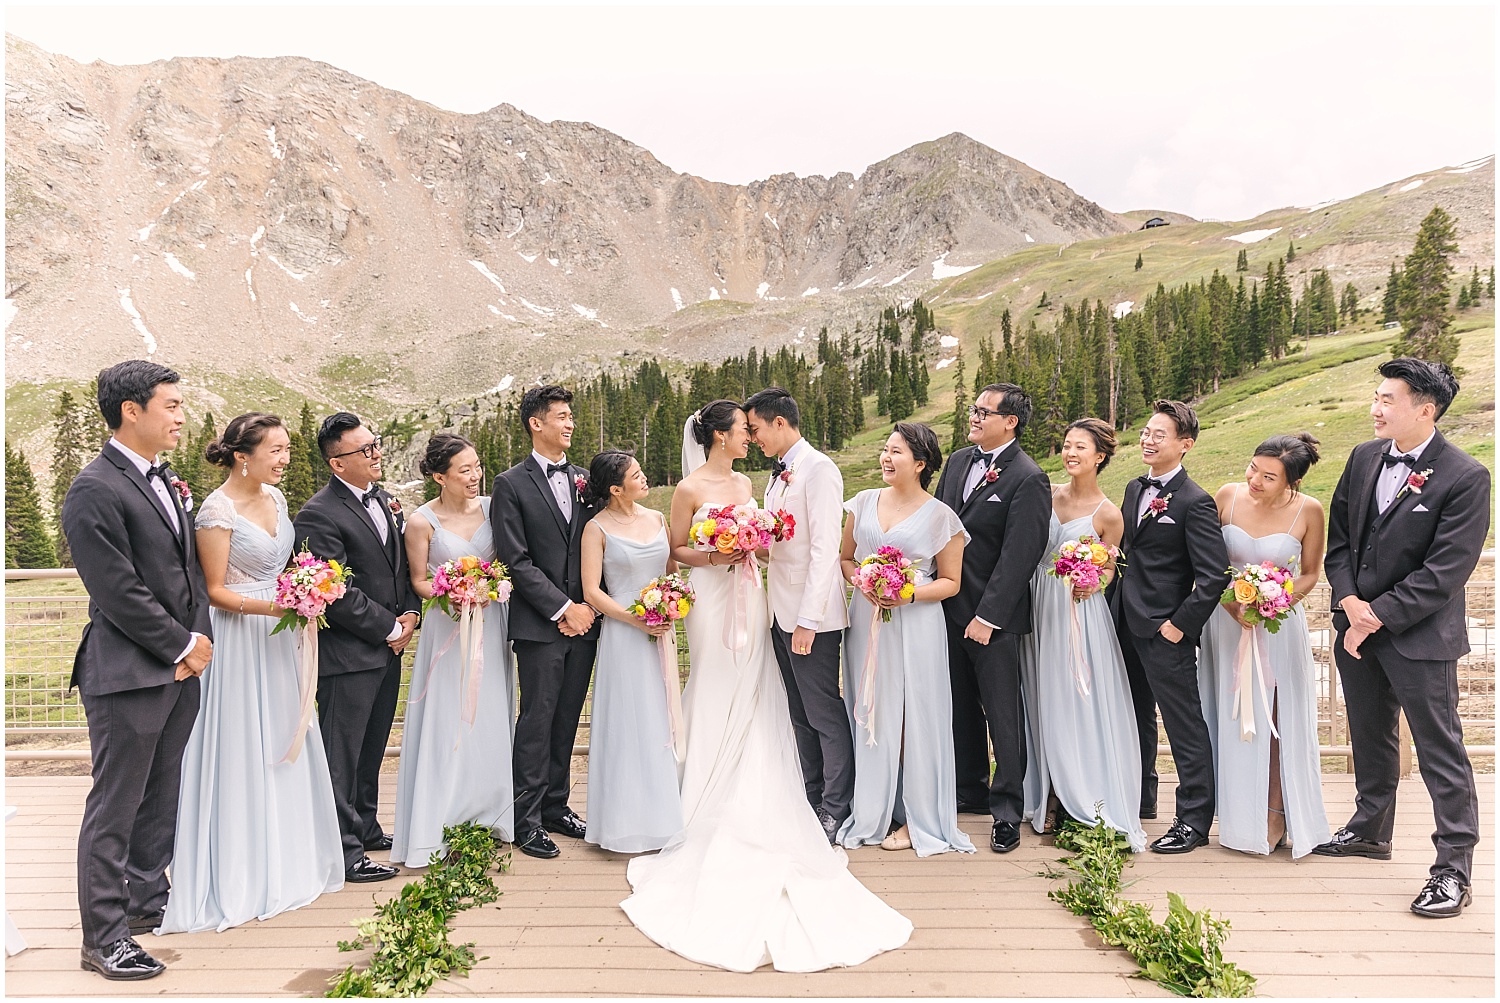 wedding party in black suits and baby blue dresses with pink bouquets by A florae at Black Mountain Lodge Arapahoe Basin Colorado